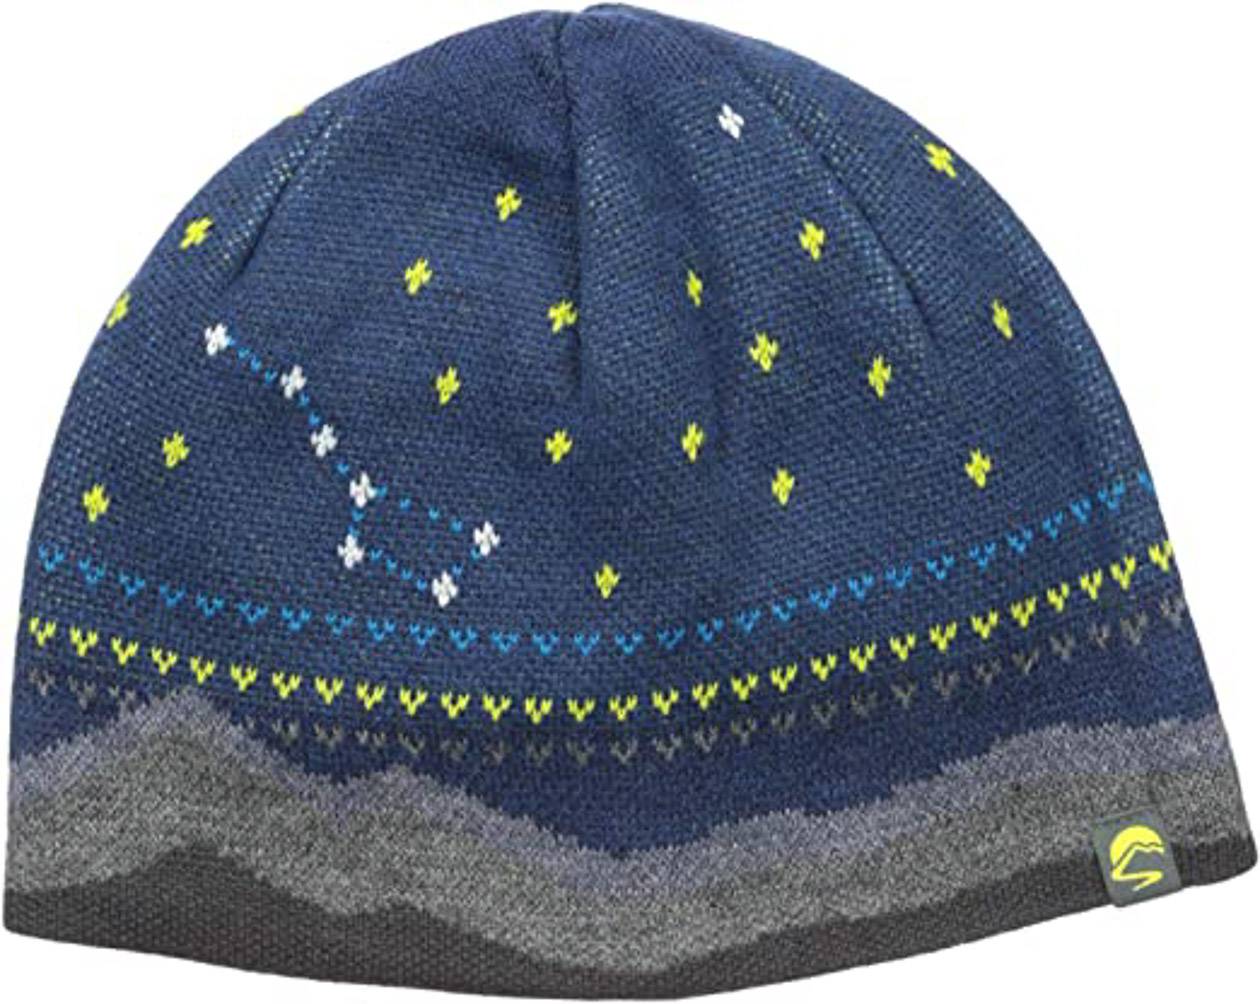 The Stellar Beanie that shines in low light conditions